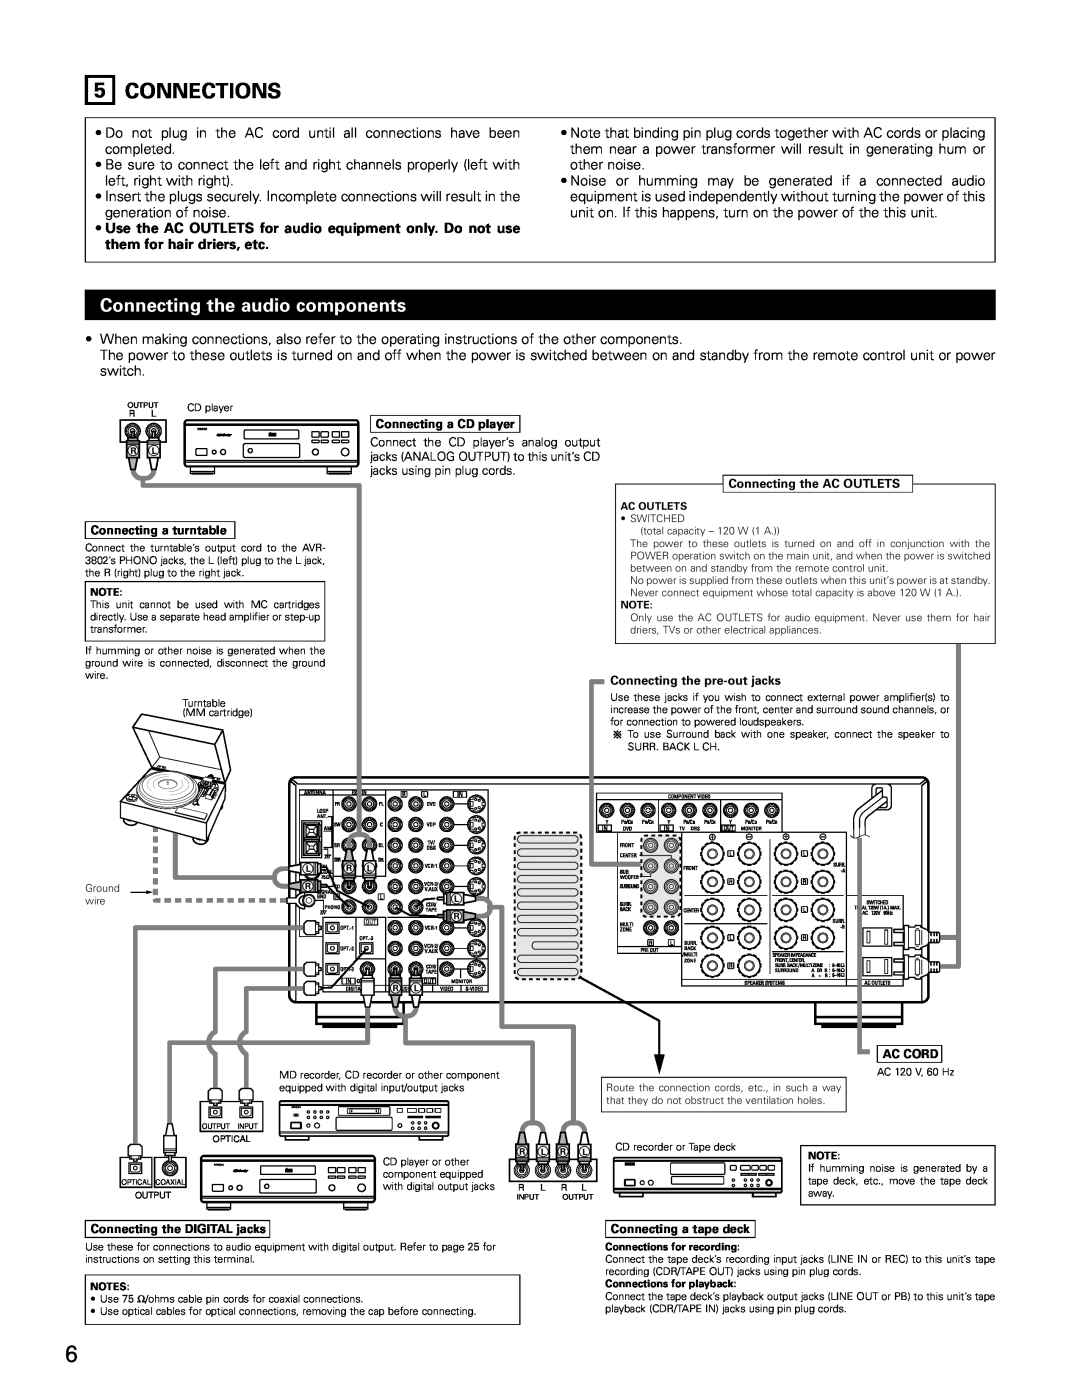 Denon AVR-3802 manual Connections, Connecting the audio components 